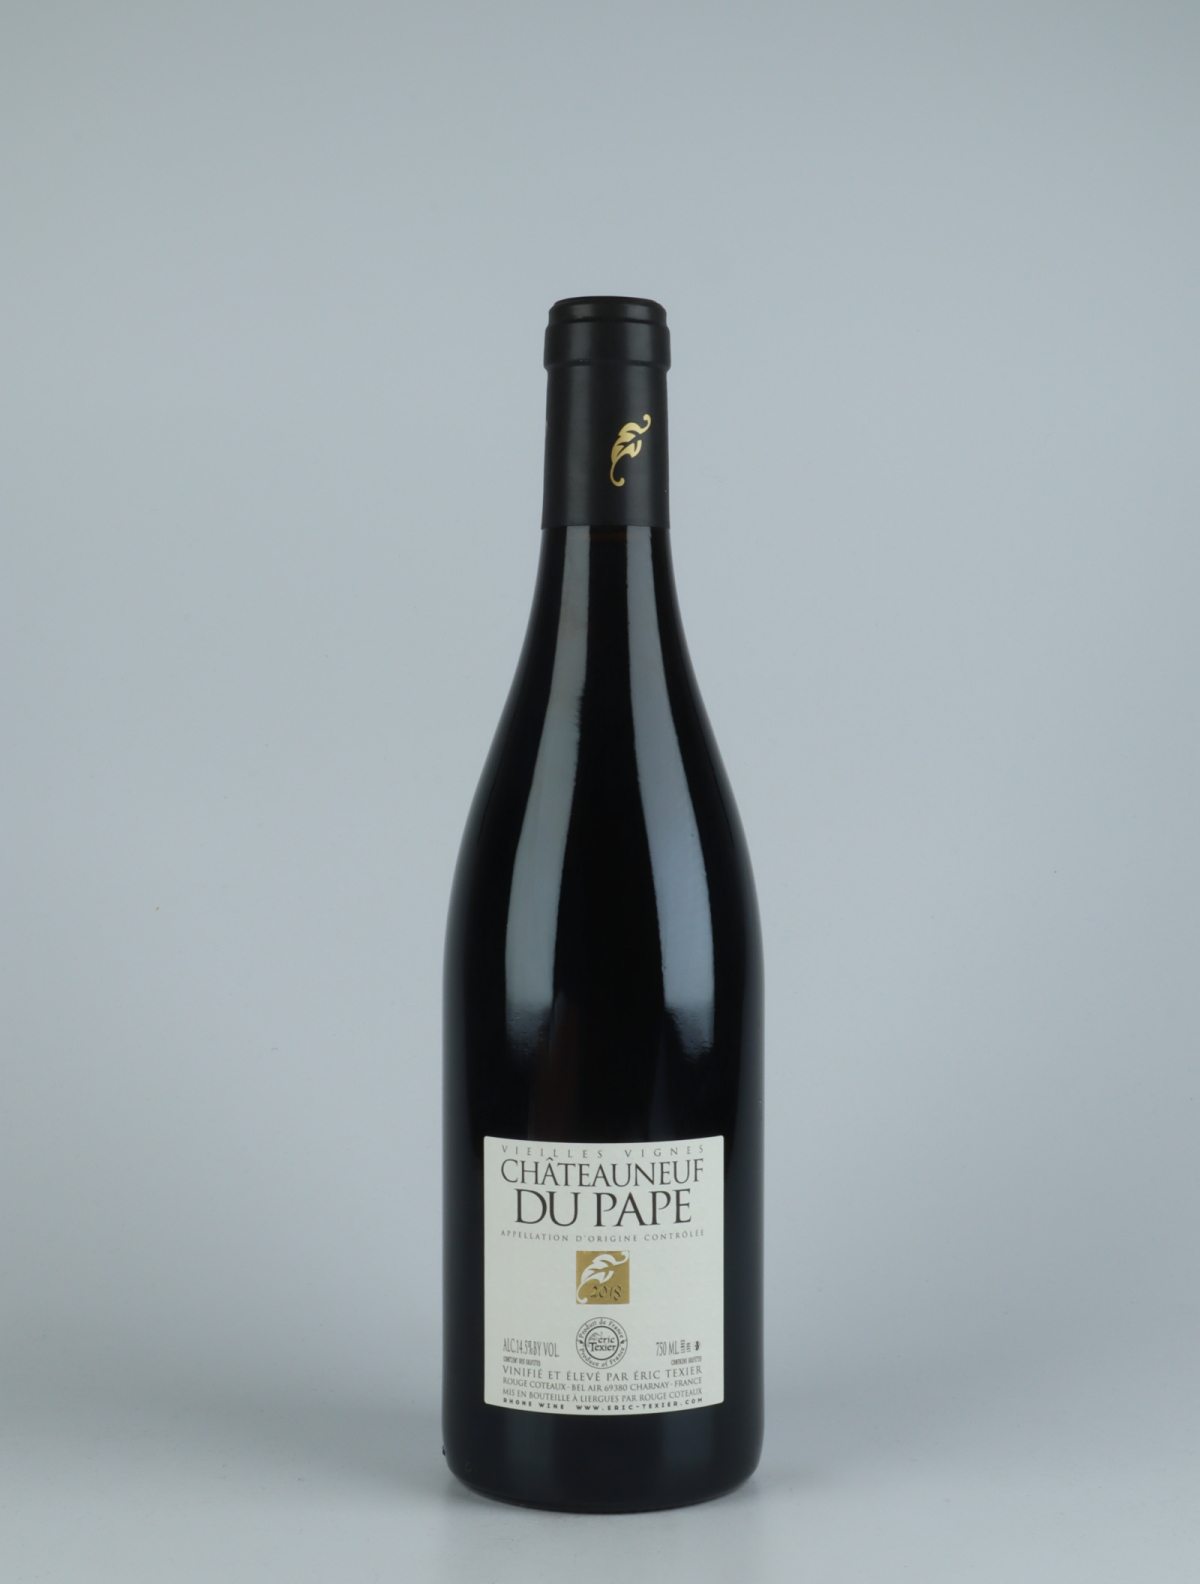 A bottle 2018 Châteauneuf-du-pape V.V. Red wine from Eric Texier, Rhône in France